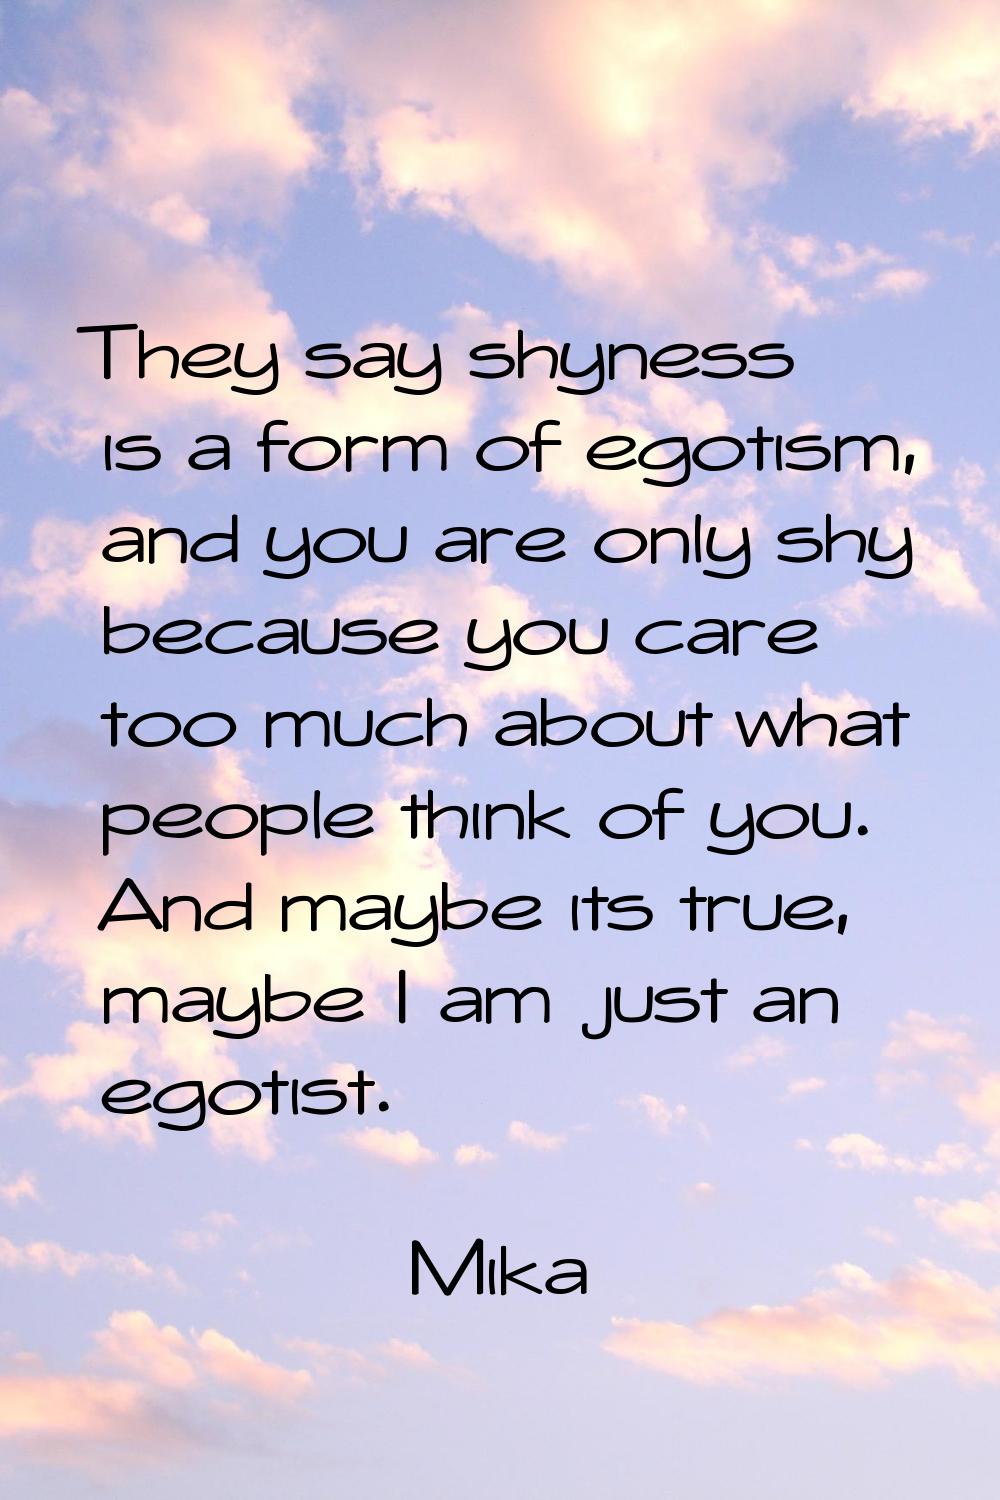 They say shyness is a form of egotism, and you are only shy because you care too much about what pe